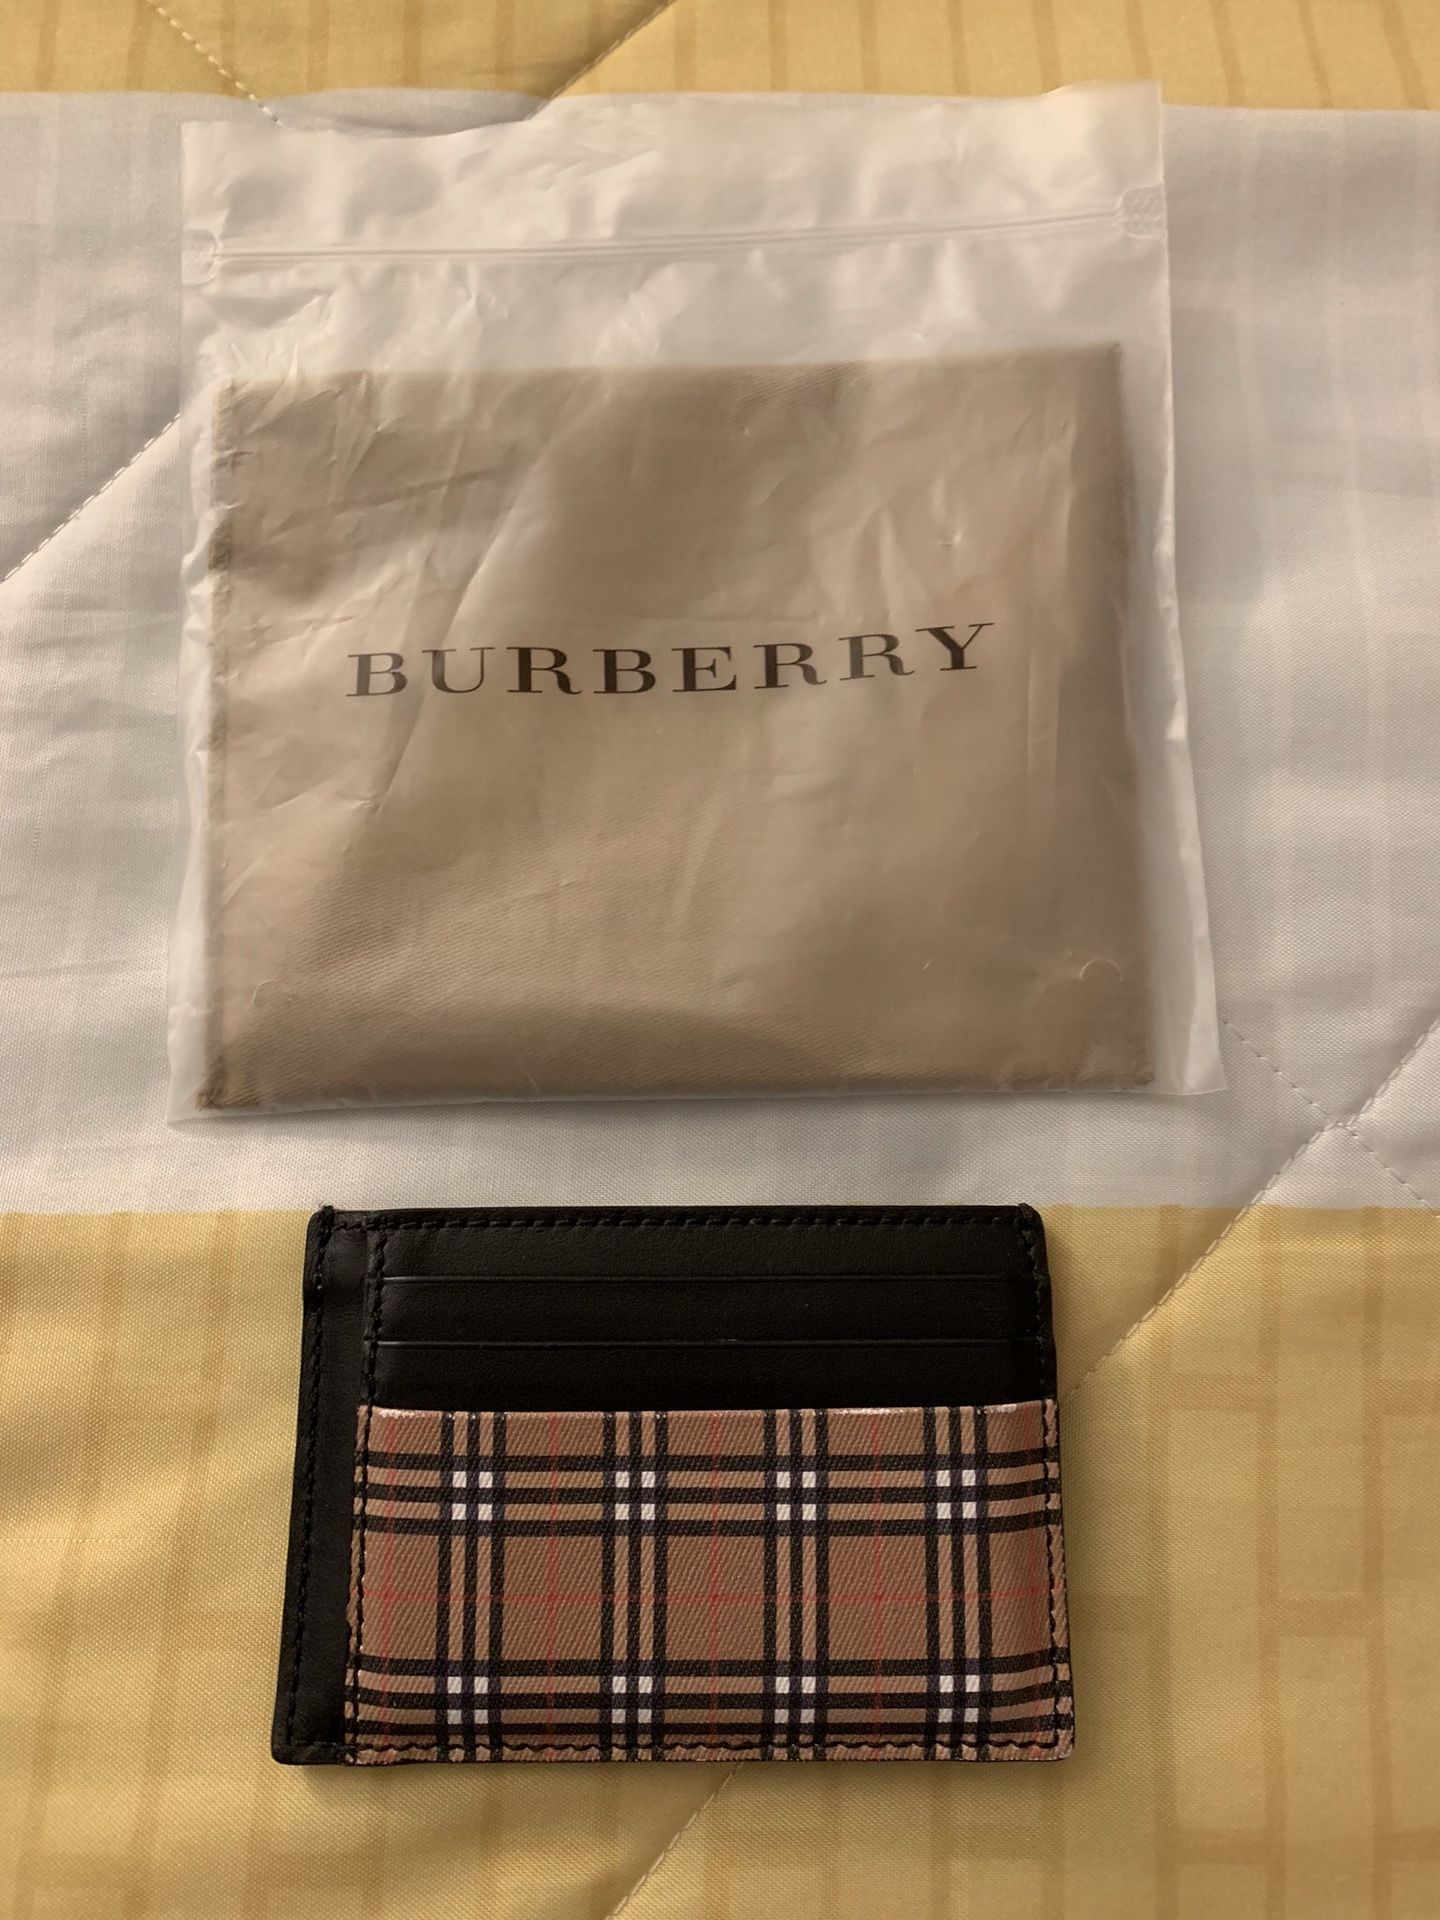 Burberry Card Holder for Sale in Palmdale, CA - OfferUp